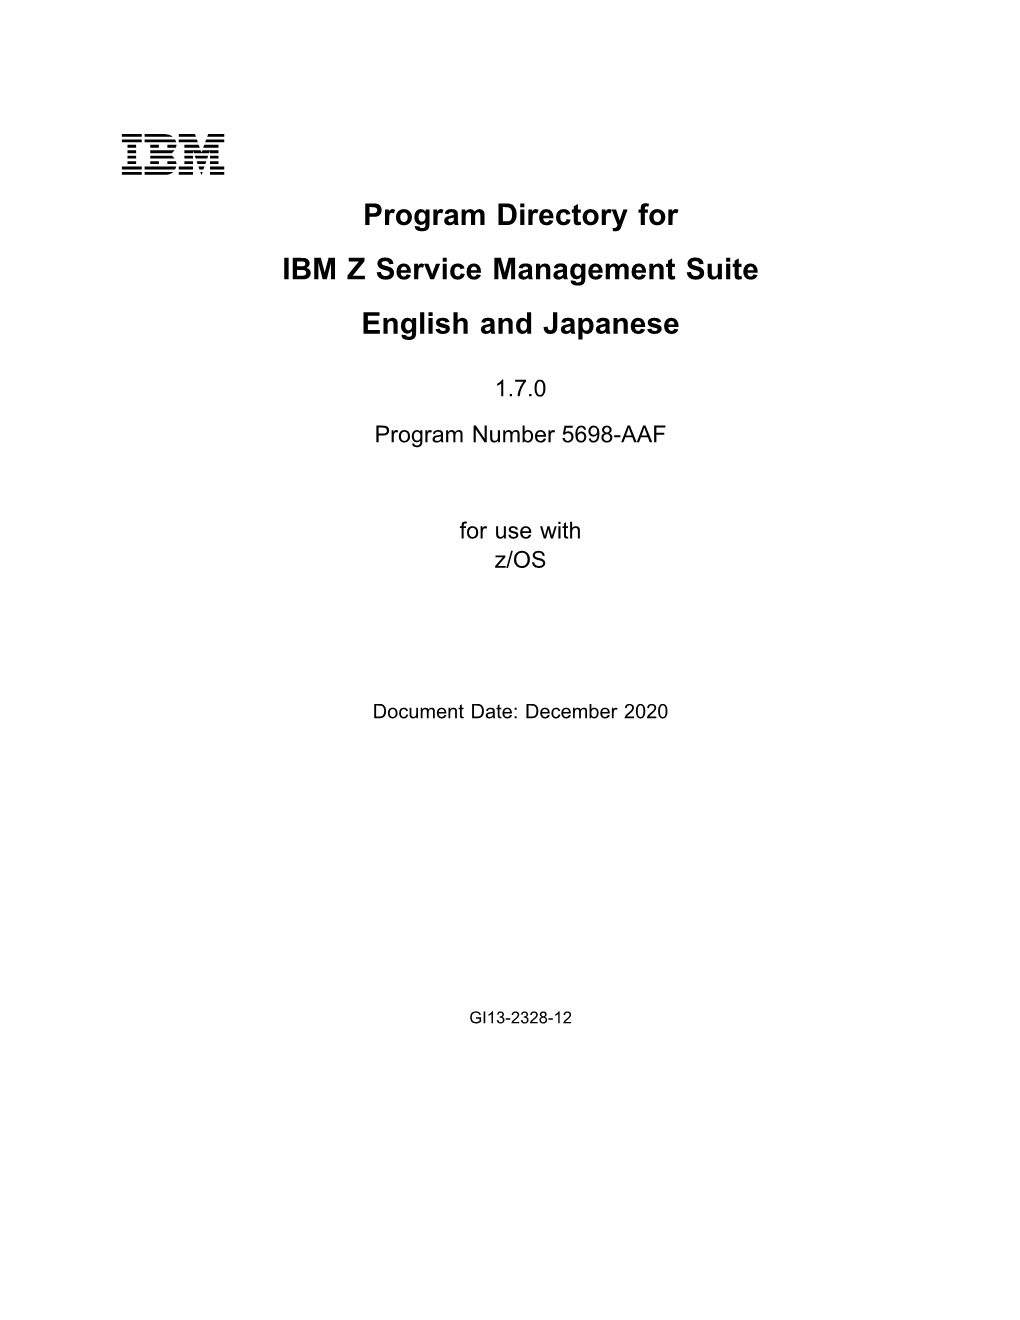 Program Directory for IBM Z Service Management Suite English and Japanese